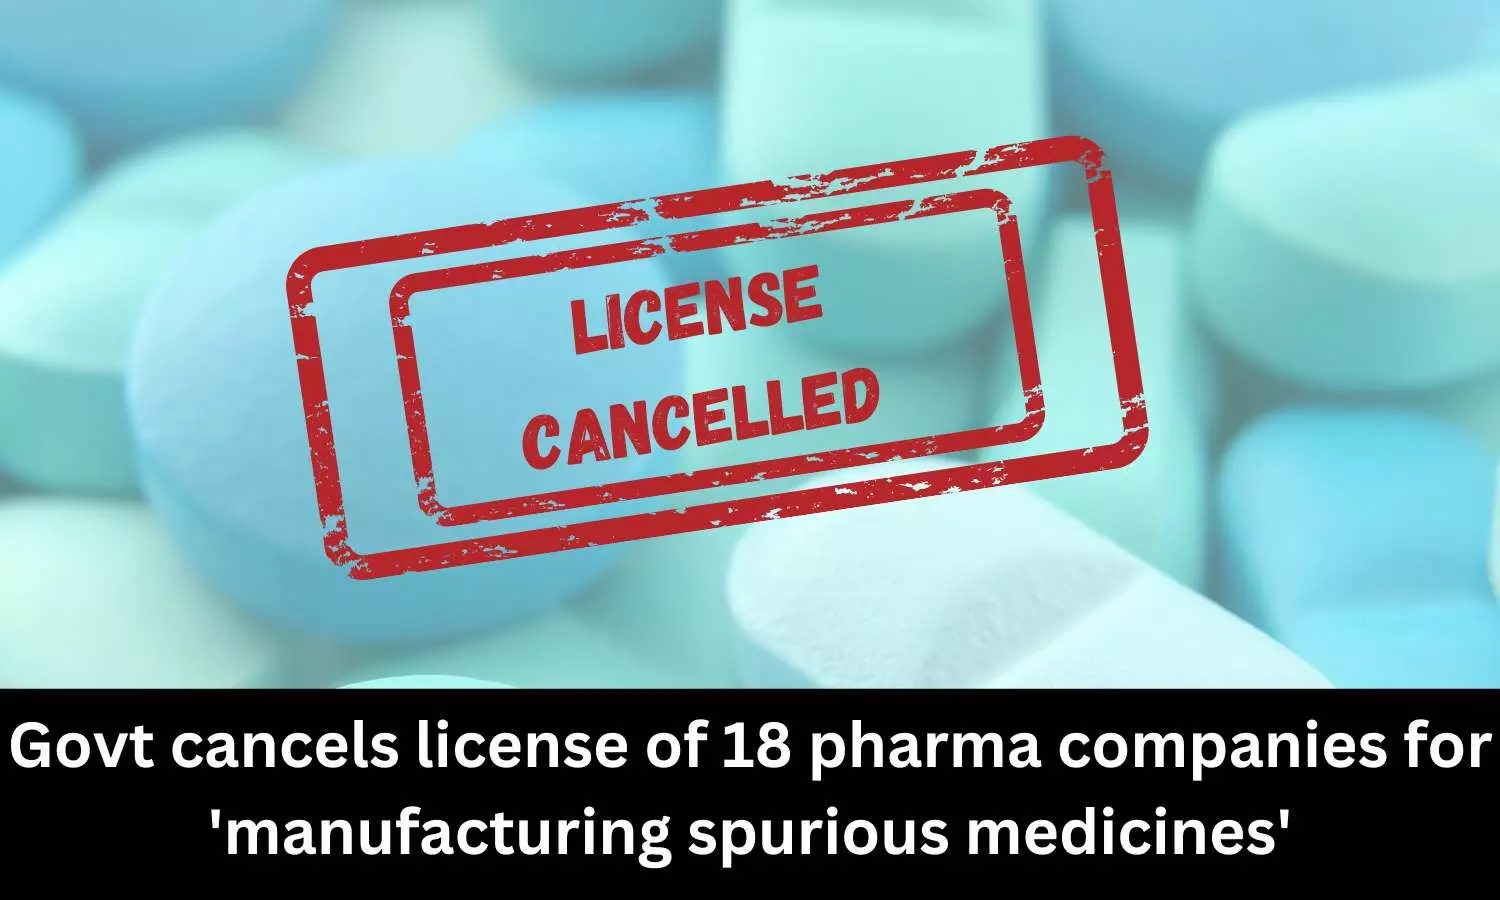 Govt cancels licenses of 18 pharma companies for manufacturing spurious medicines